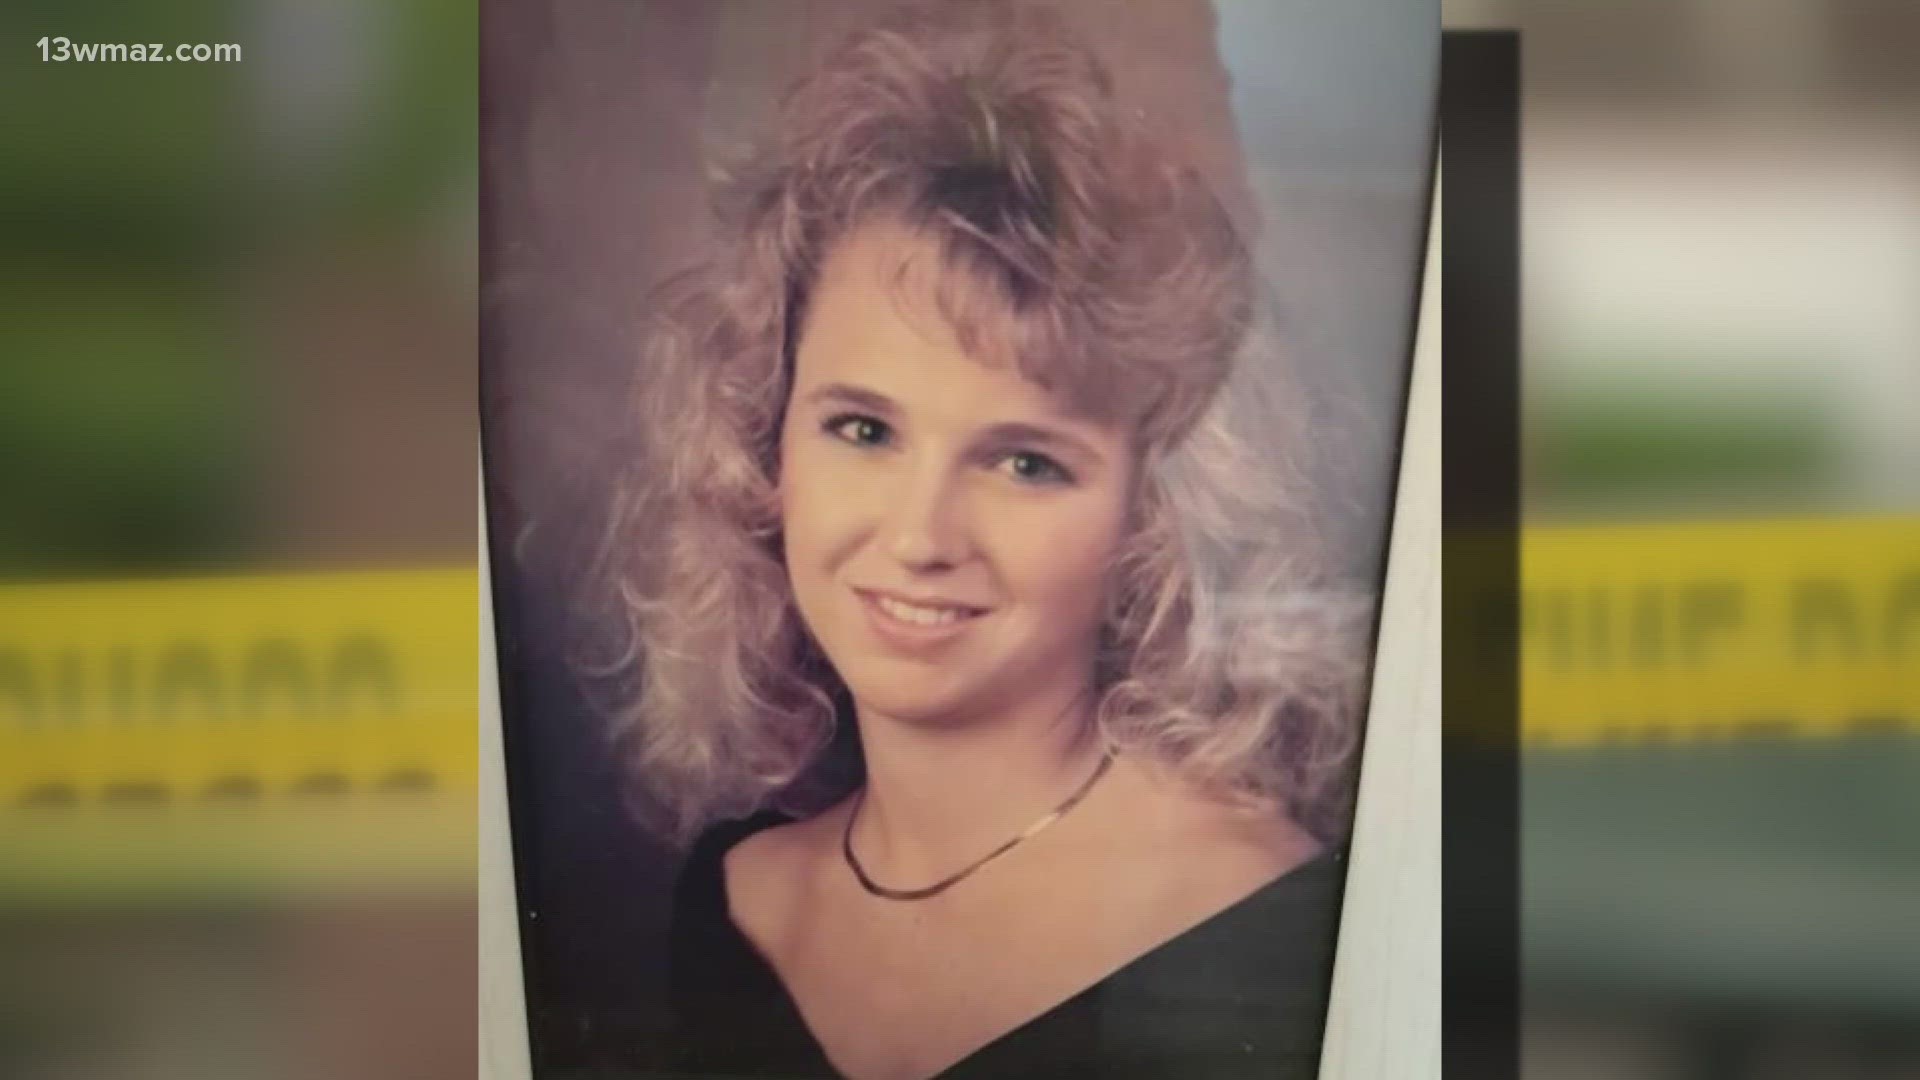 Georgia's new cold-case law is called the Coleman-Baker Act, to honor families like Rhonda Coleman's. She was murdered in May 1990.